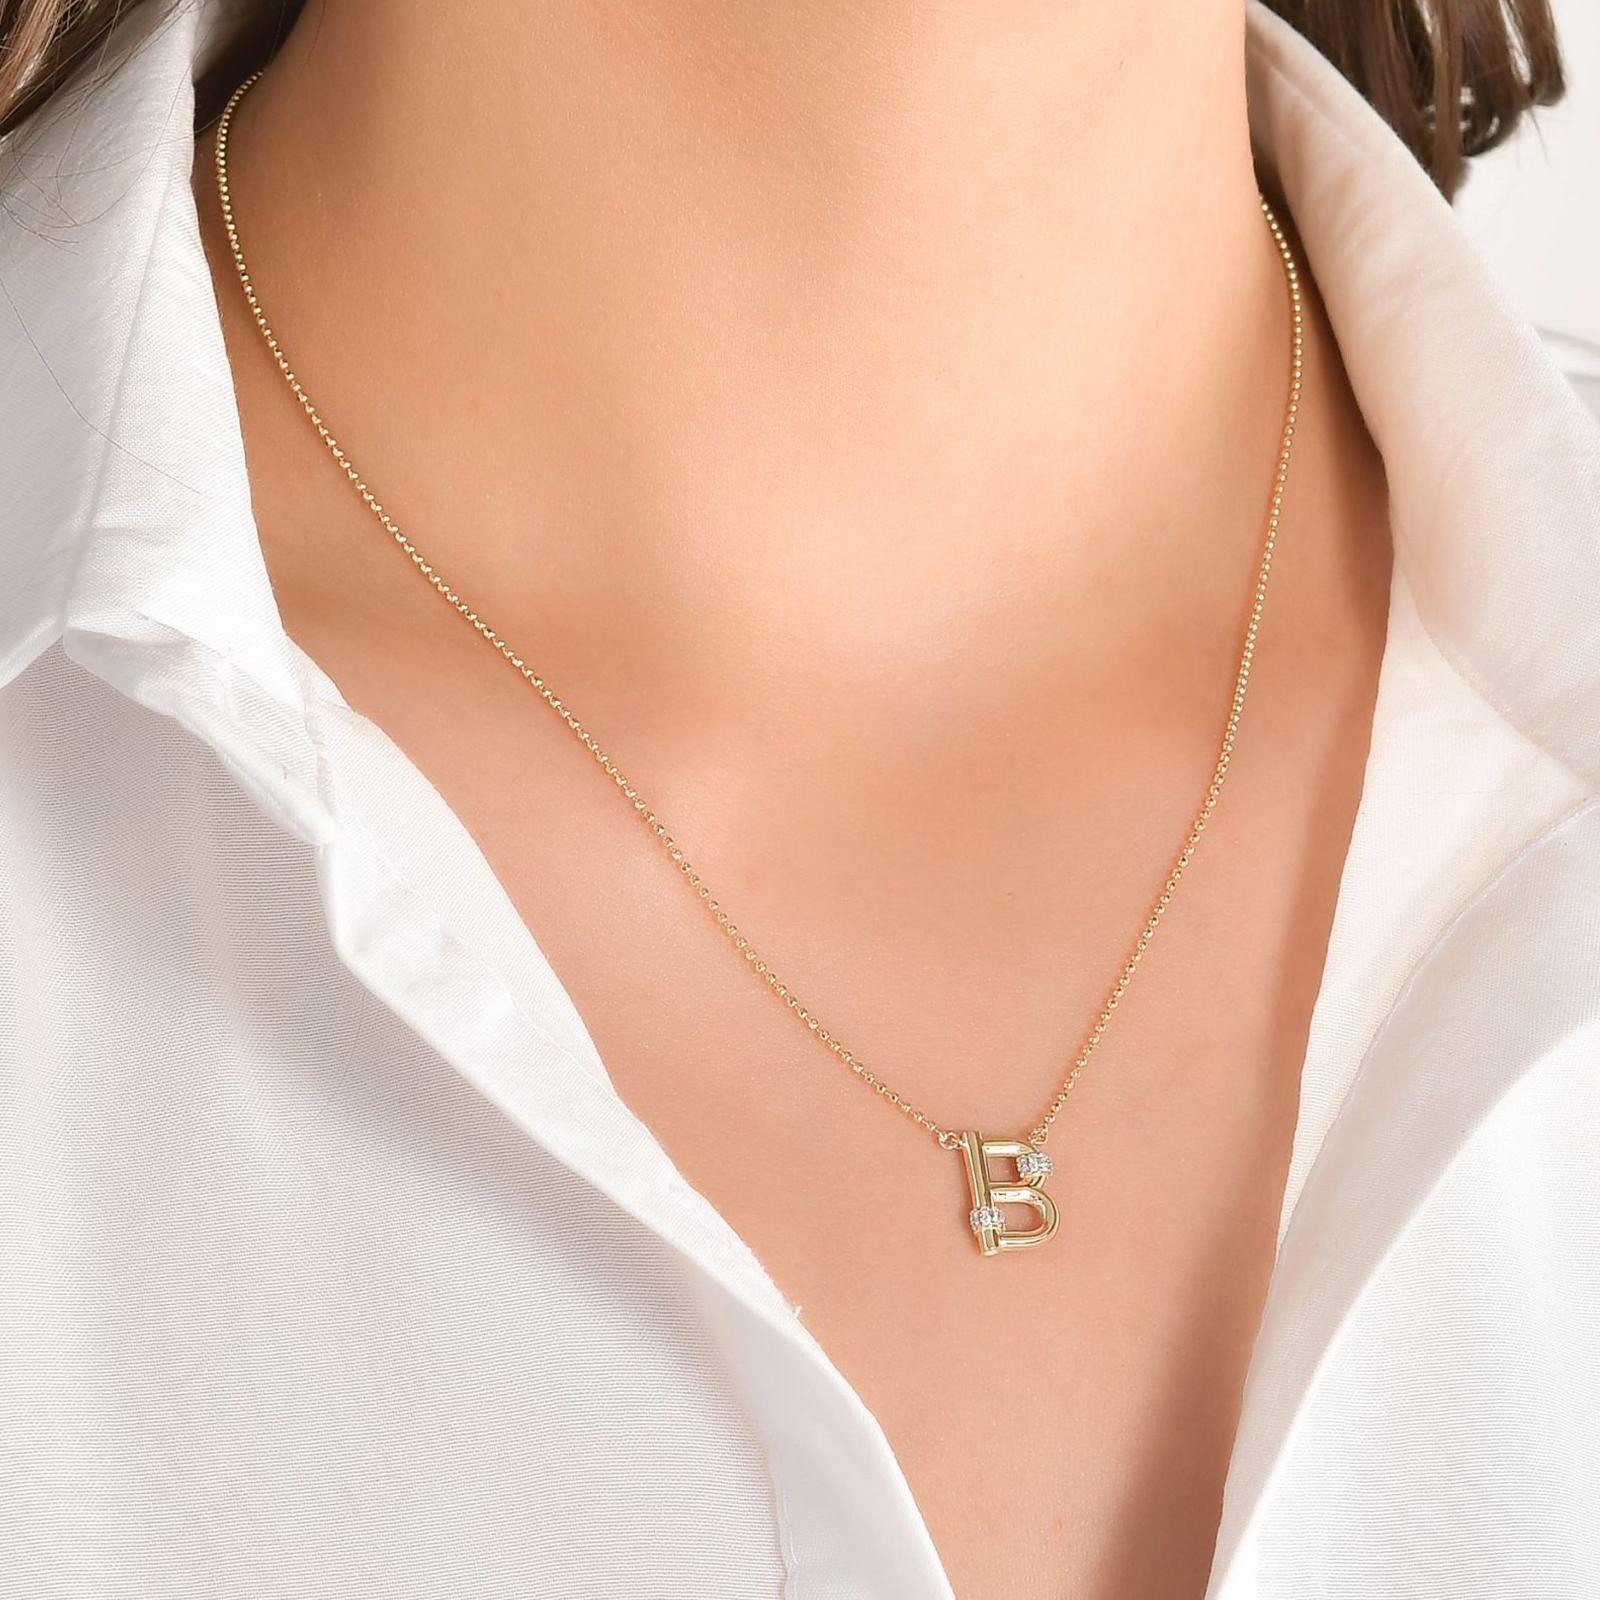 Sophisticated Diamond B Letter Charm Featuring Brilliant-cut Diamonds and a 14K Yellow Gold

Round Diamond: 0,08ct	
Color: E	
Clairty: SI
14K Gold: 4.20Gr.